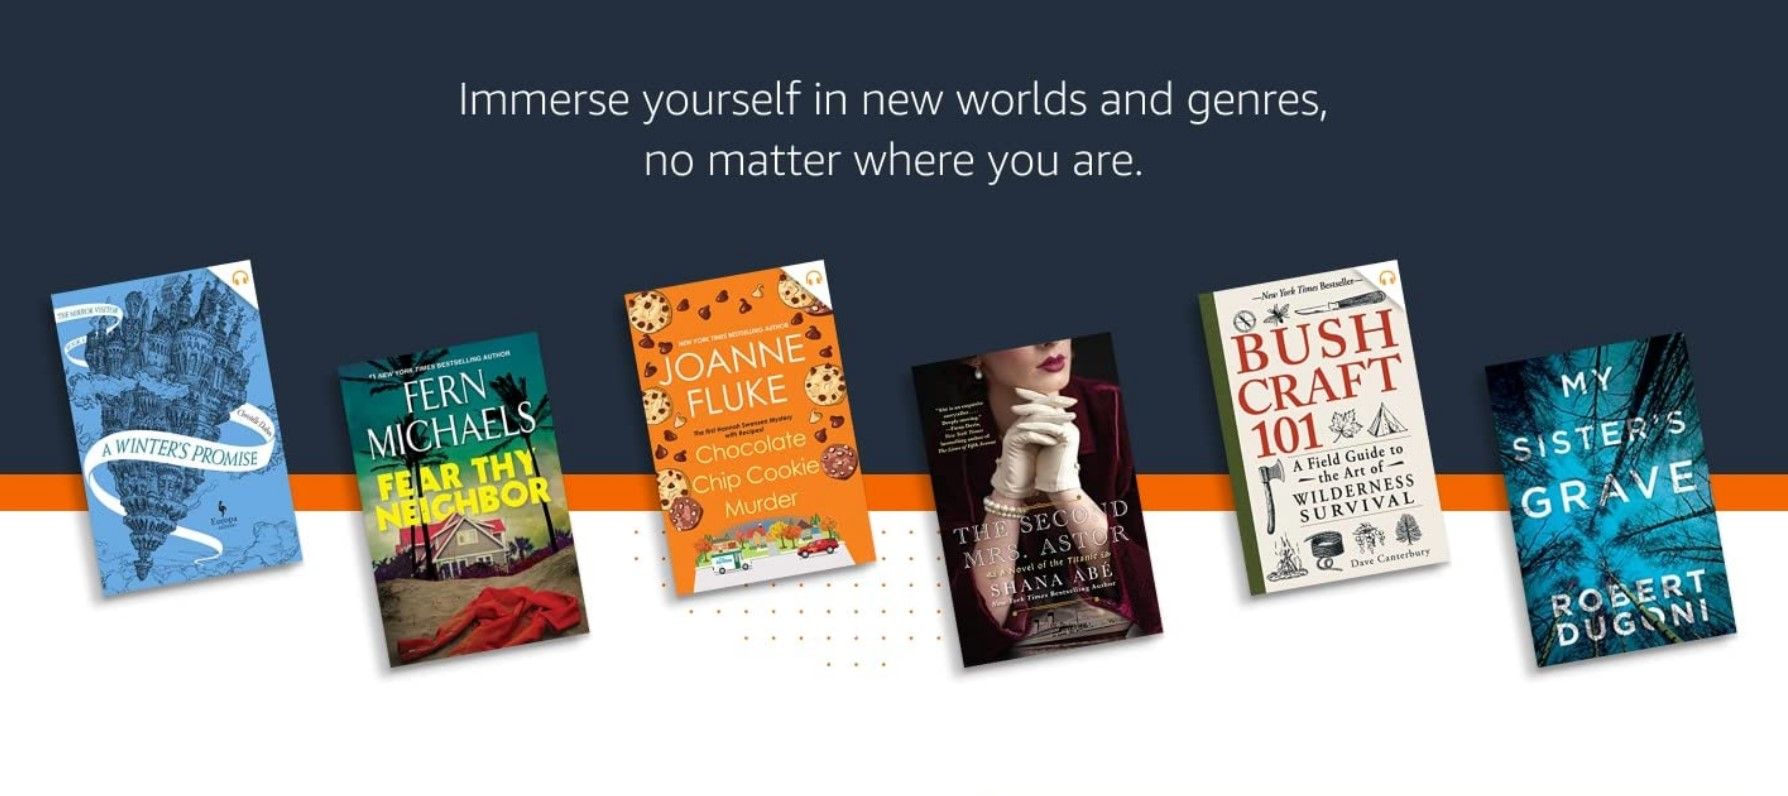 Best Kindle deal: Get access to the Kindle Unlimited library of e-books for  free for 3 months.